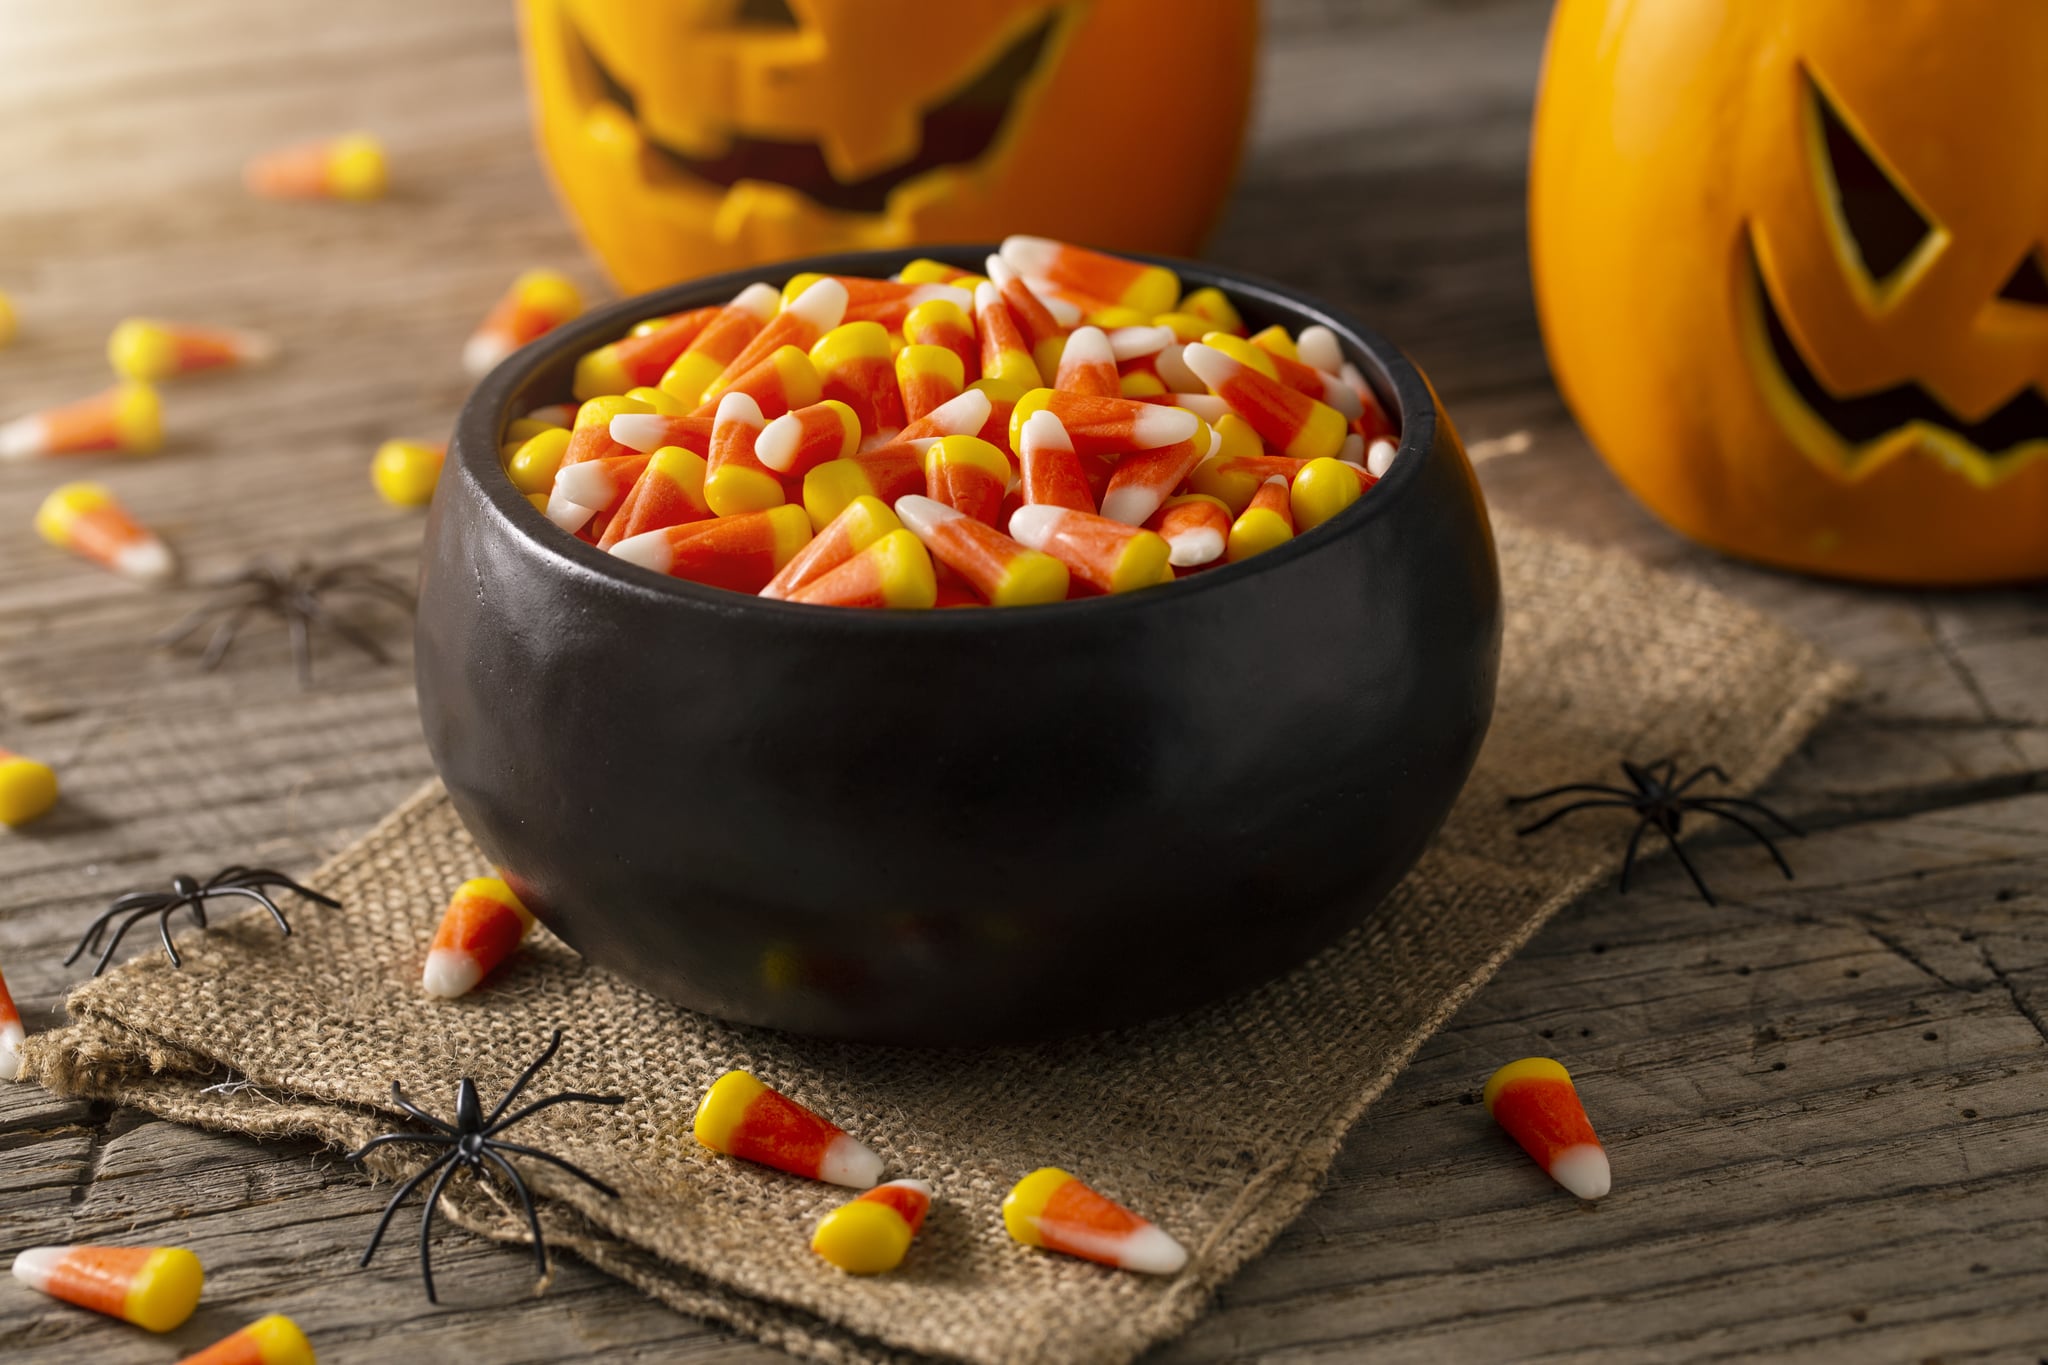 Bowl of Halloween candy corns with jack o' lanterns and spider decoration on rustic wood table.